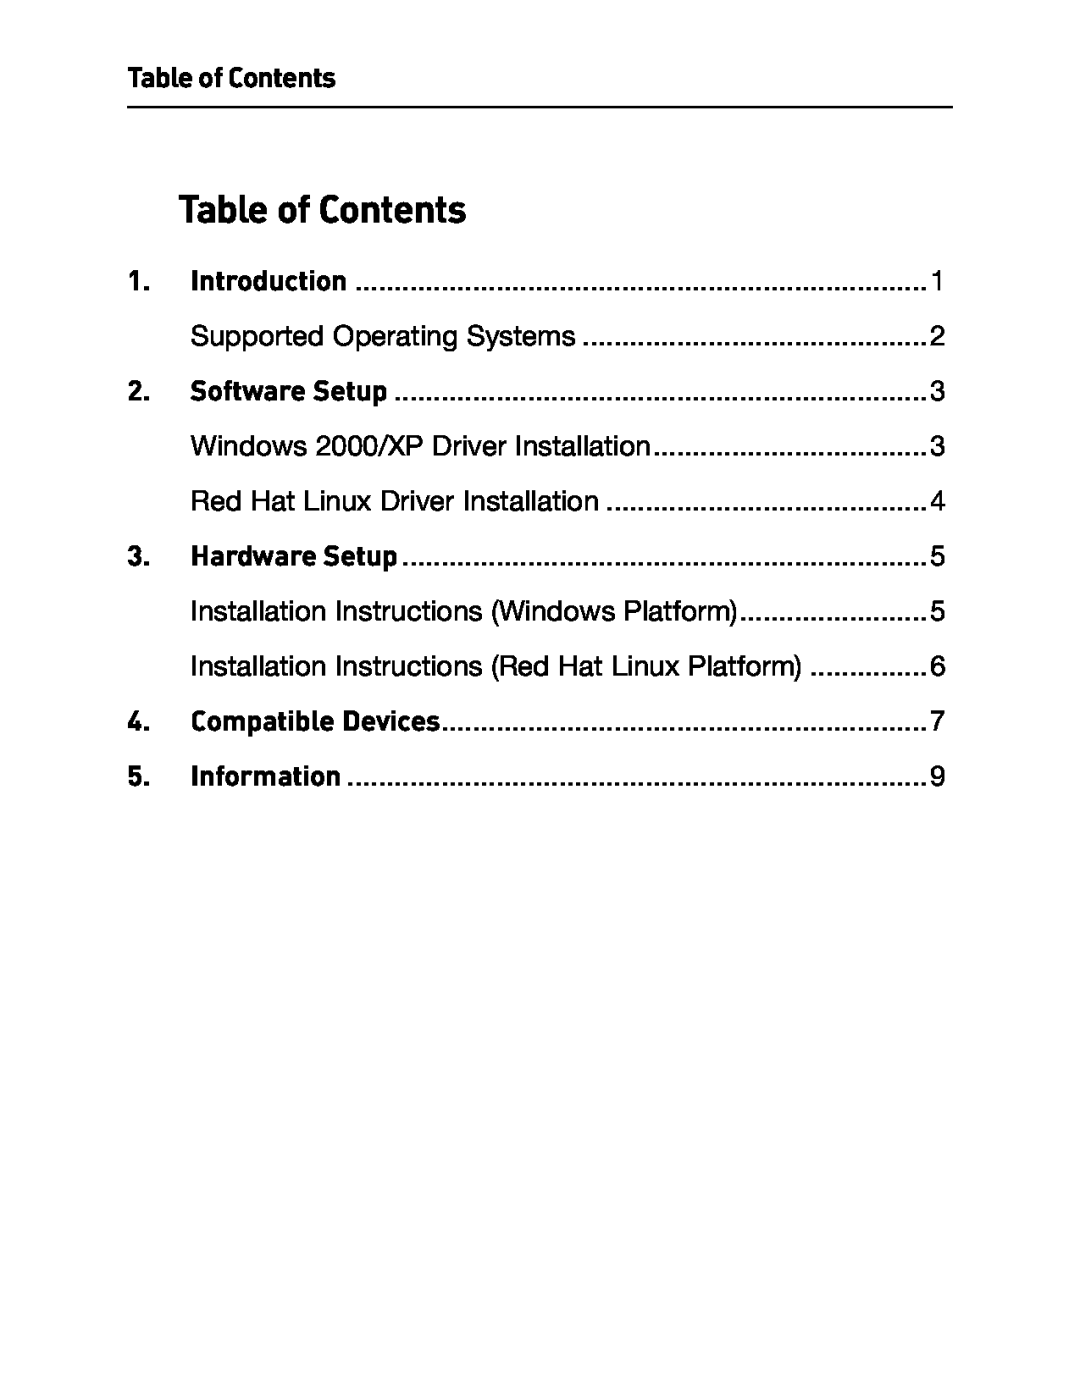 Belkin F5U257 user manual Table of Contents, Windows 2000/XP Driver Installation, Red Hat Linux Driver Installation 